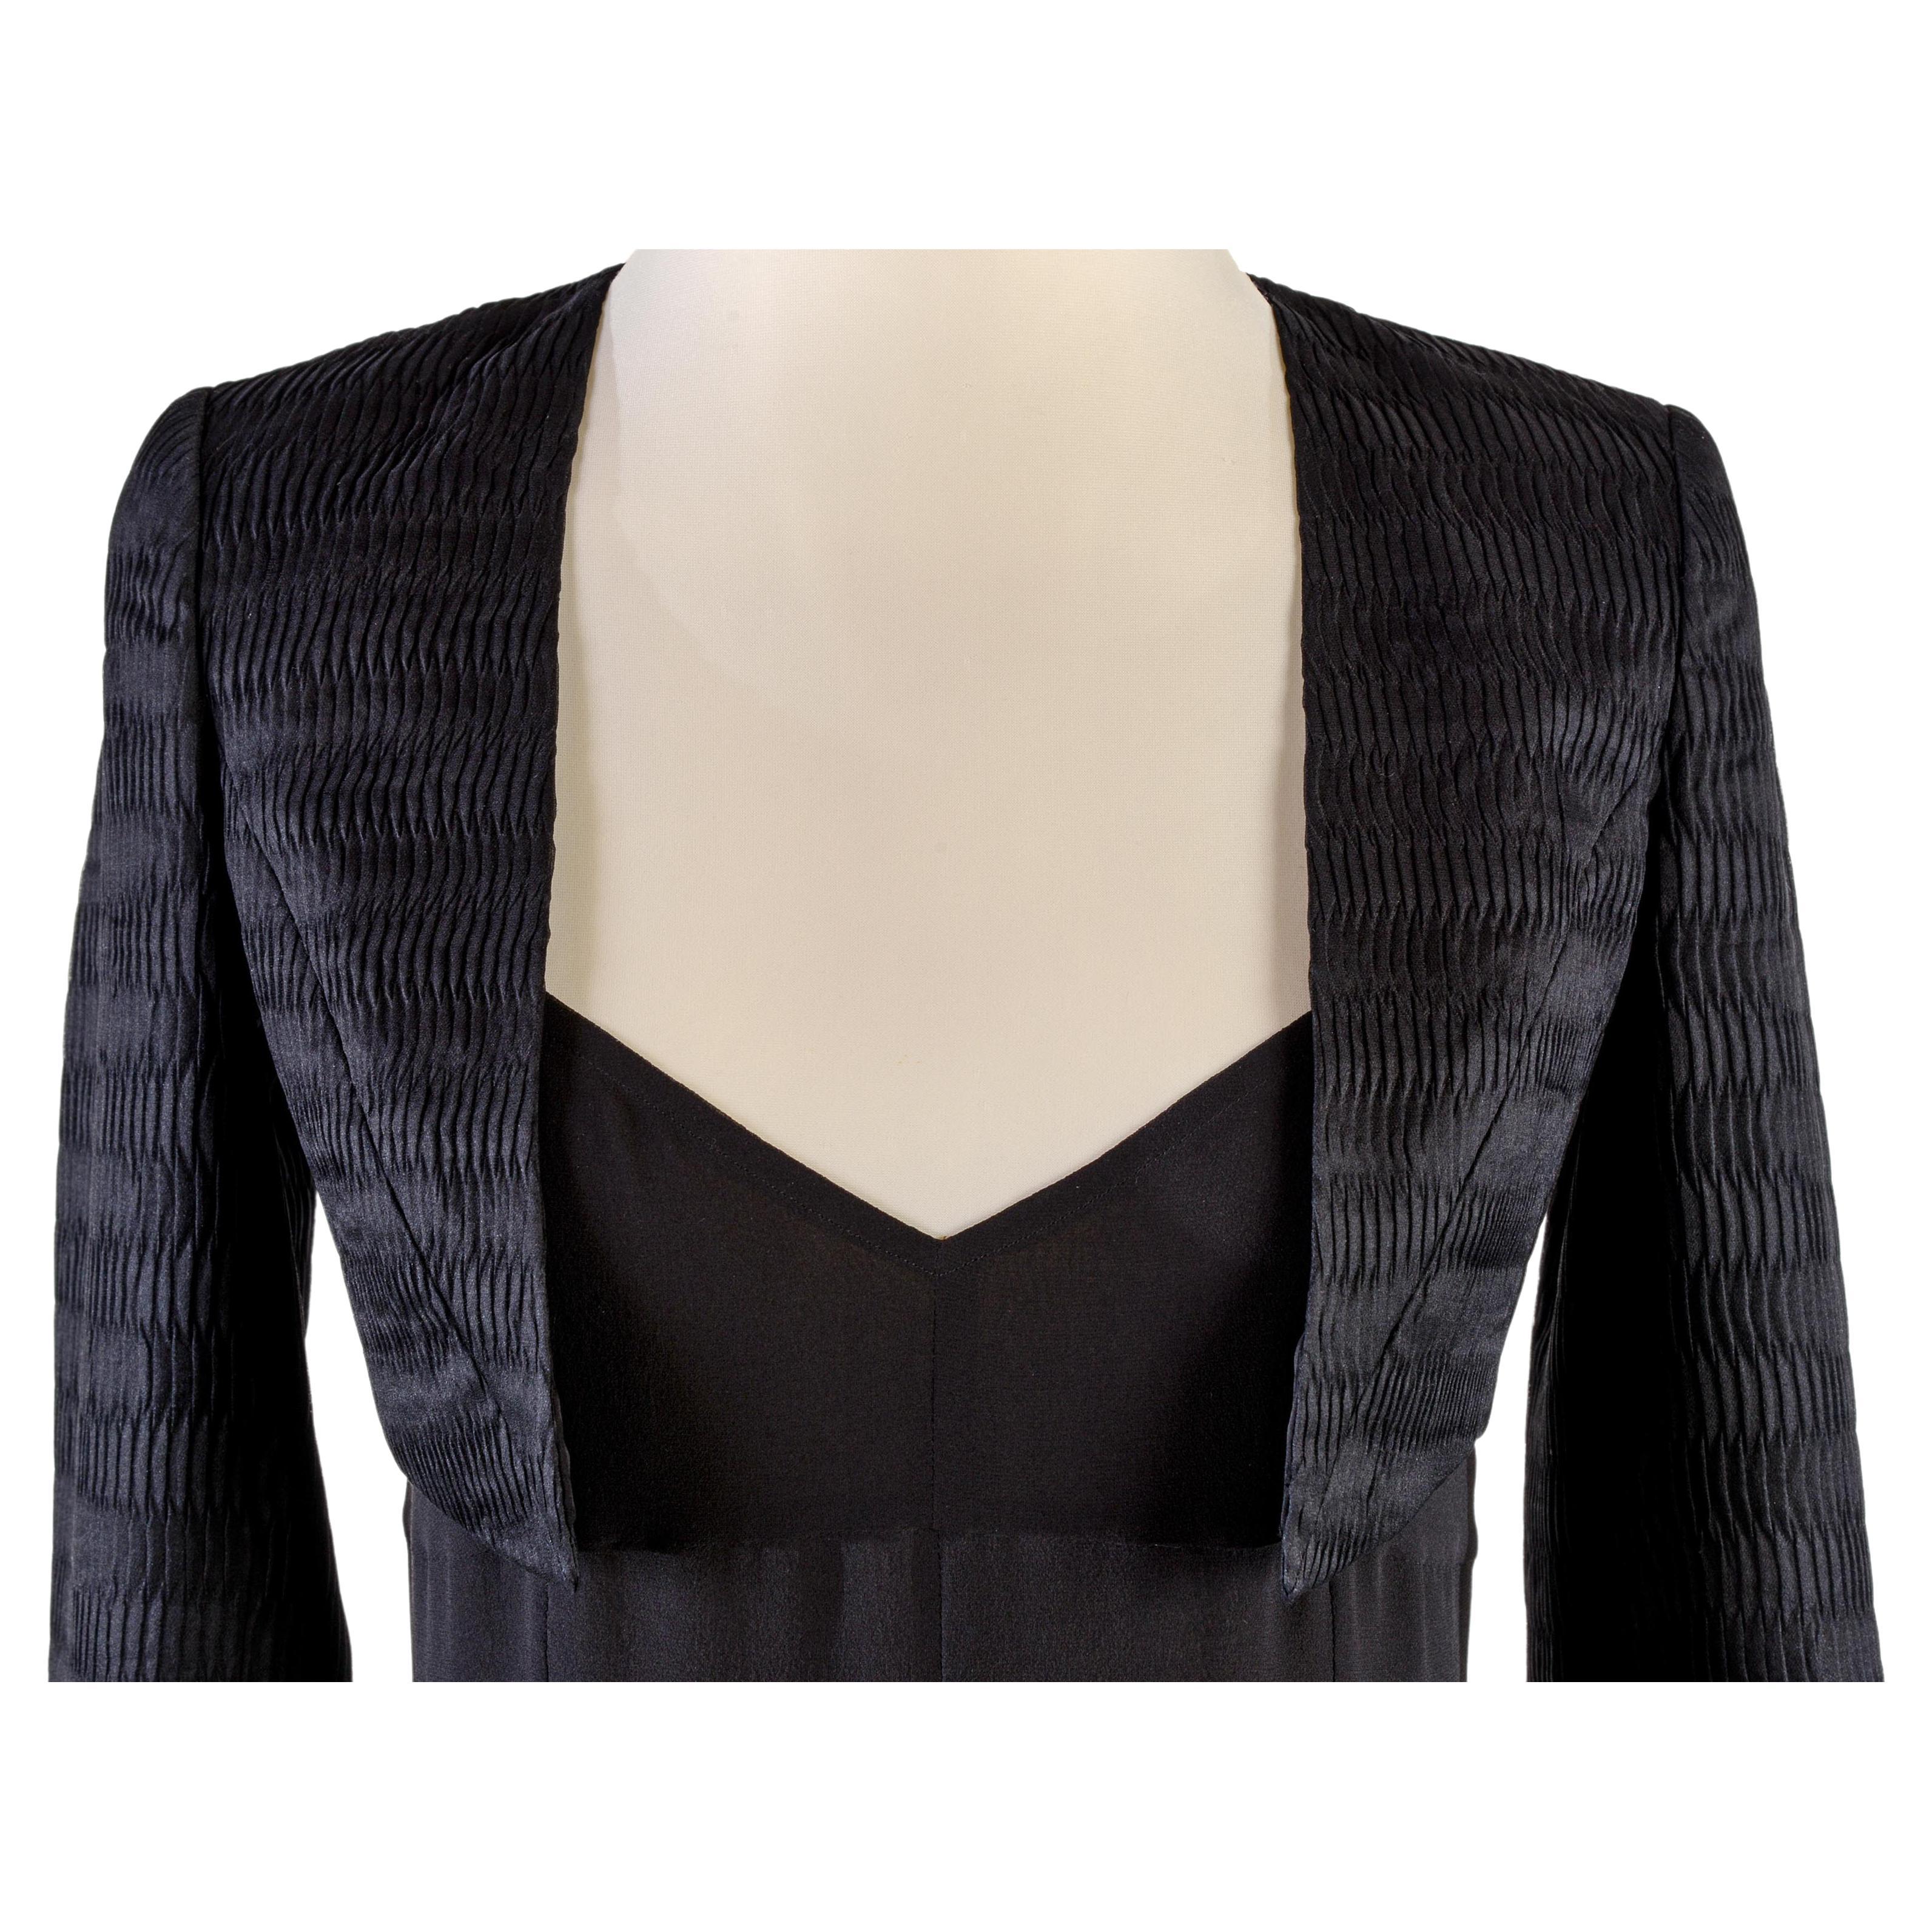 CHANEL Spring 2009  -  Look 49/71 on the show                          
Black bolero jacket
Size FR 36
Made in France
56% polyester
25% silk
19% acrylic
Lining 100% silk
Flat measures:
Length cm. 32                 
Shoulders cm. 35         
Bust